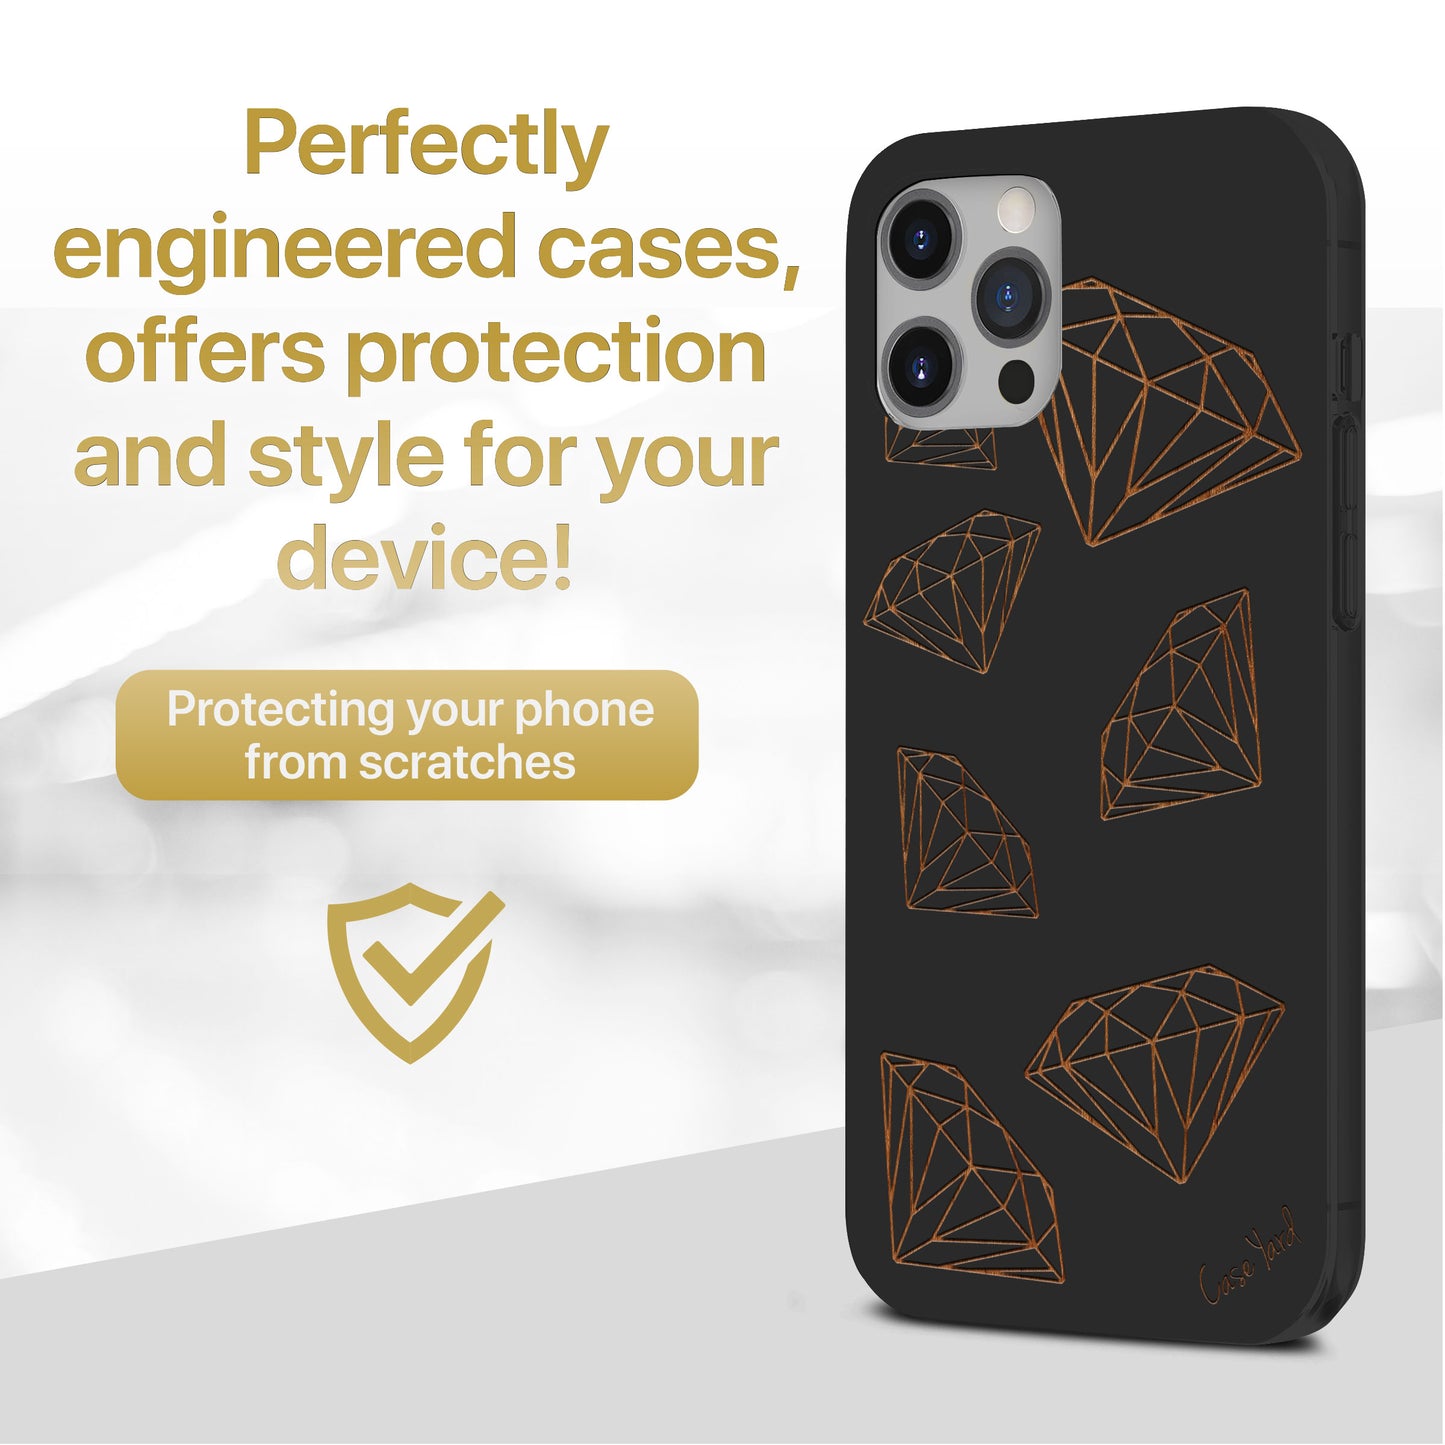 Wooden Cell Phone Case Cover, Laser Engraved case for iPhone & Samsung phone Diamonds Design